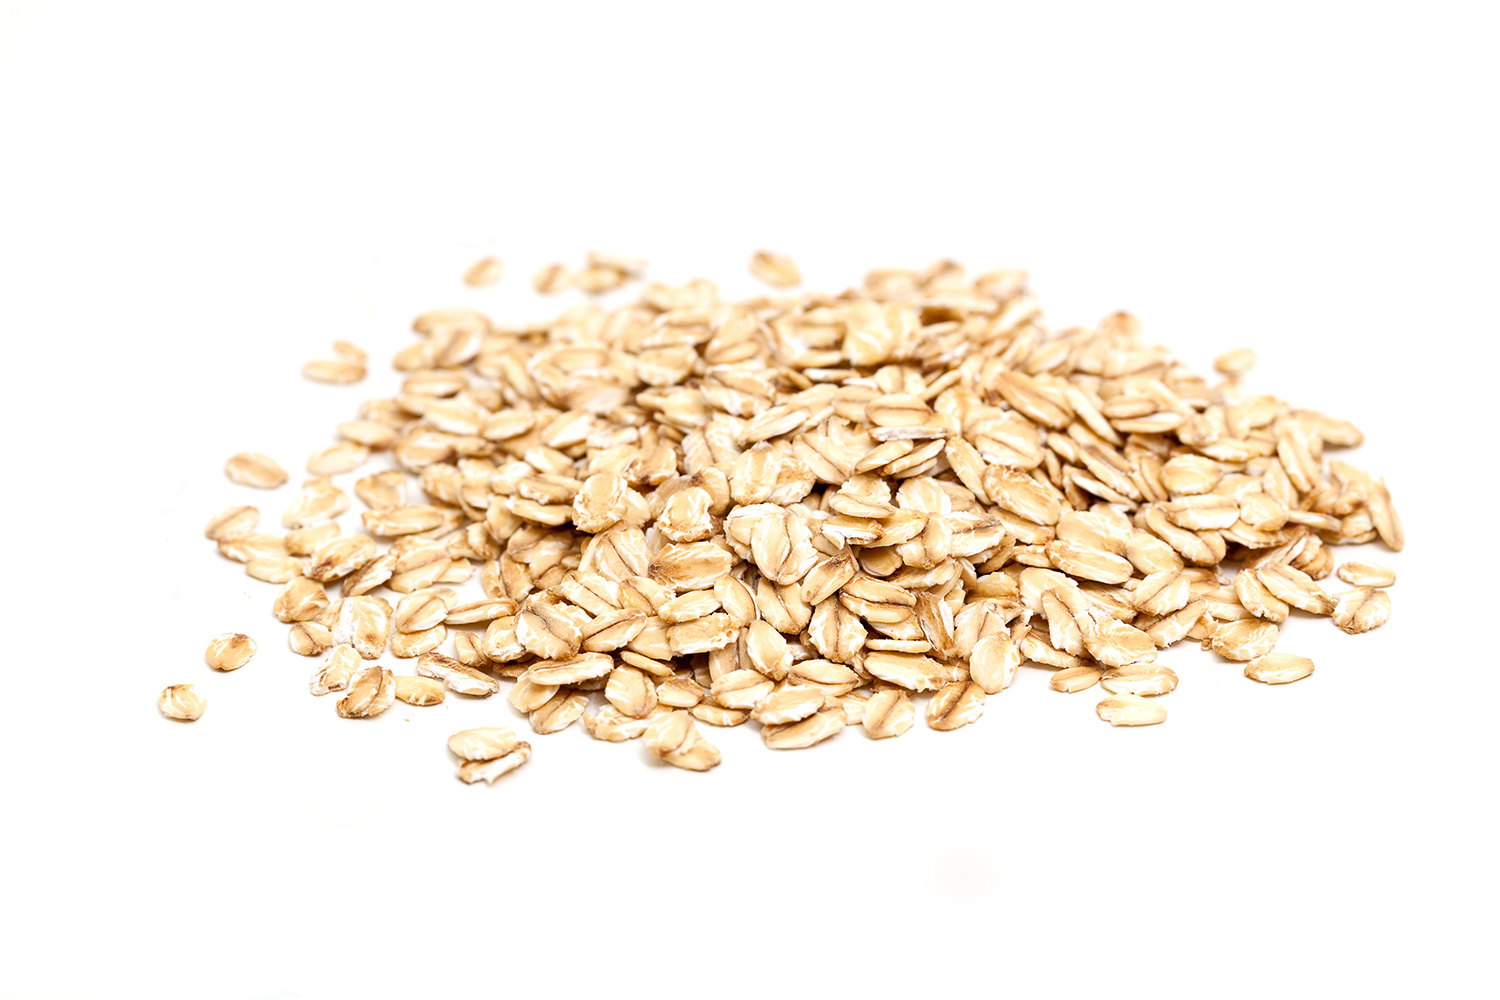 Oats helps to control cholesterol